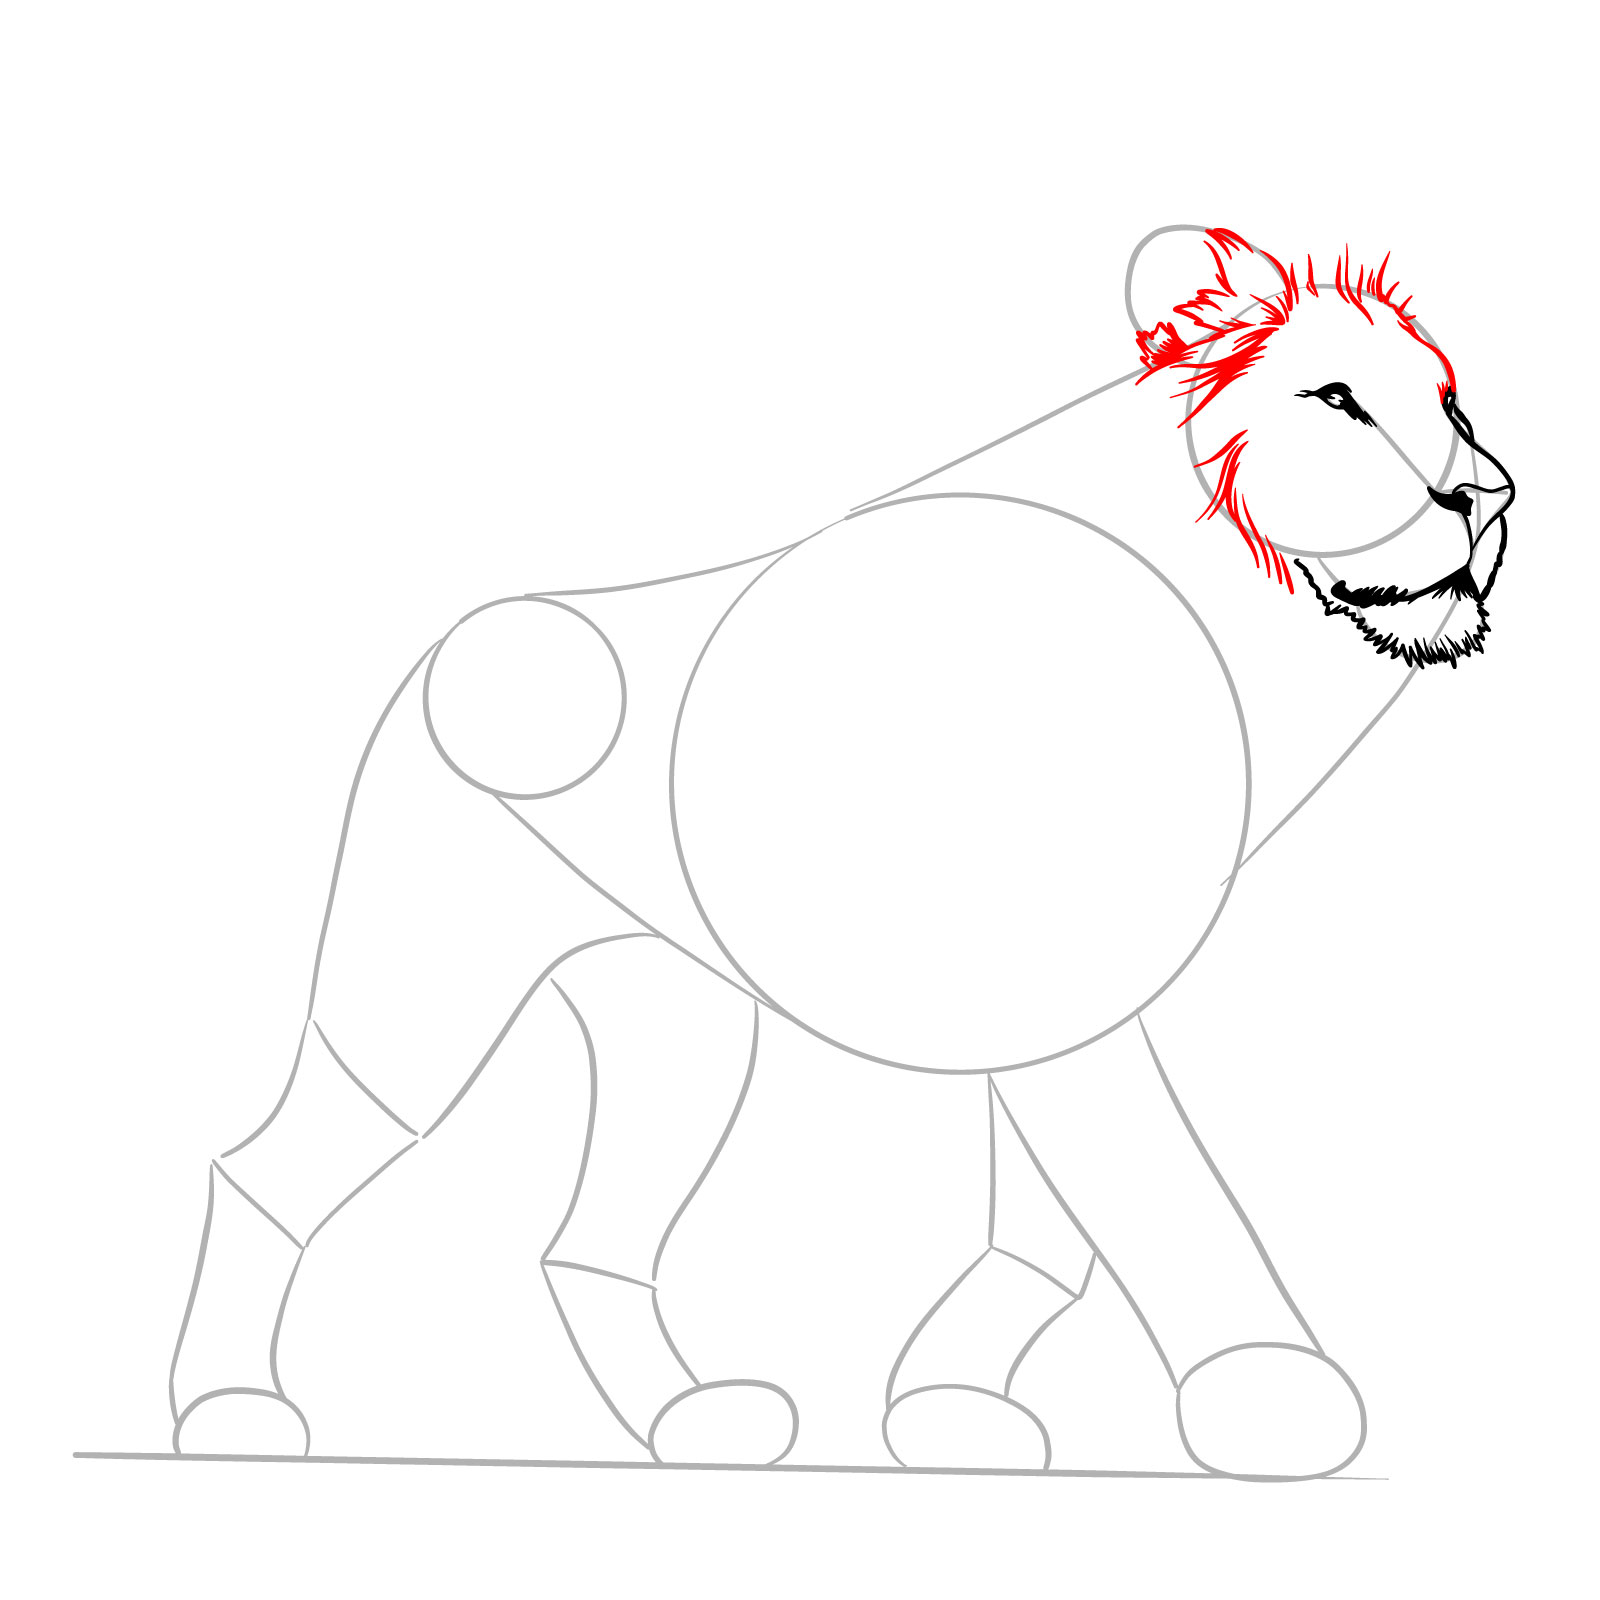 Walking lion sketch highlighting the fur around the face - step 06